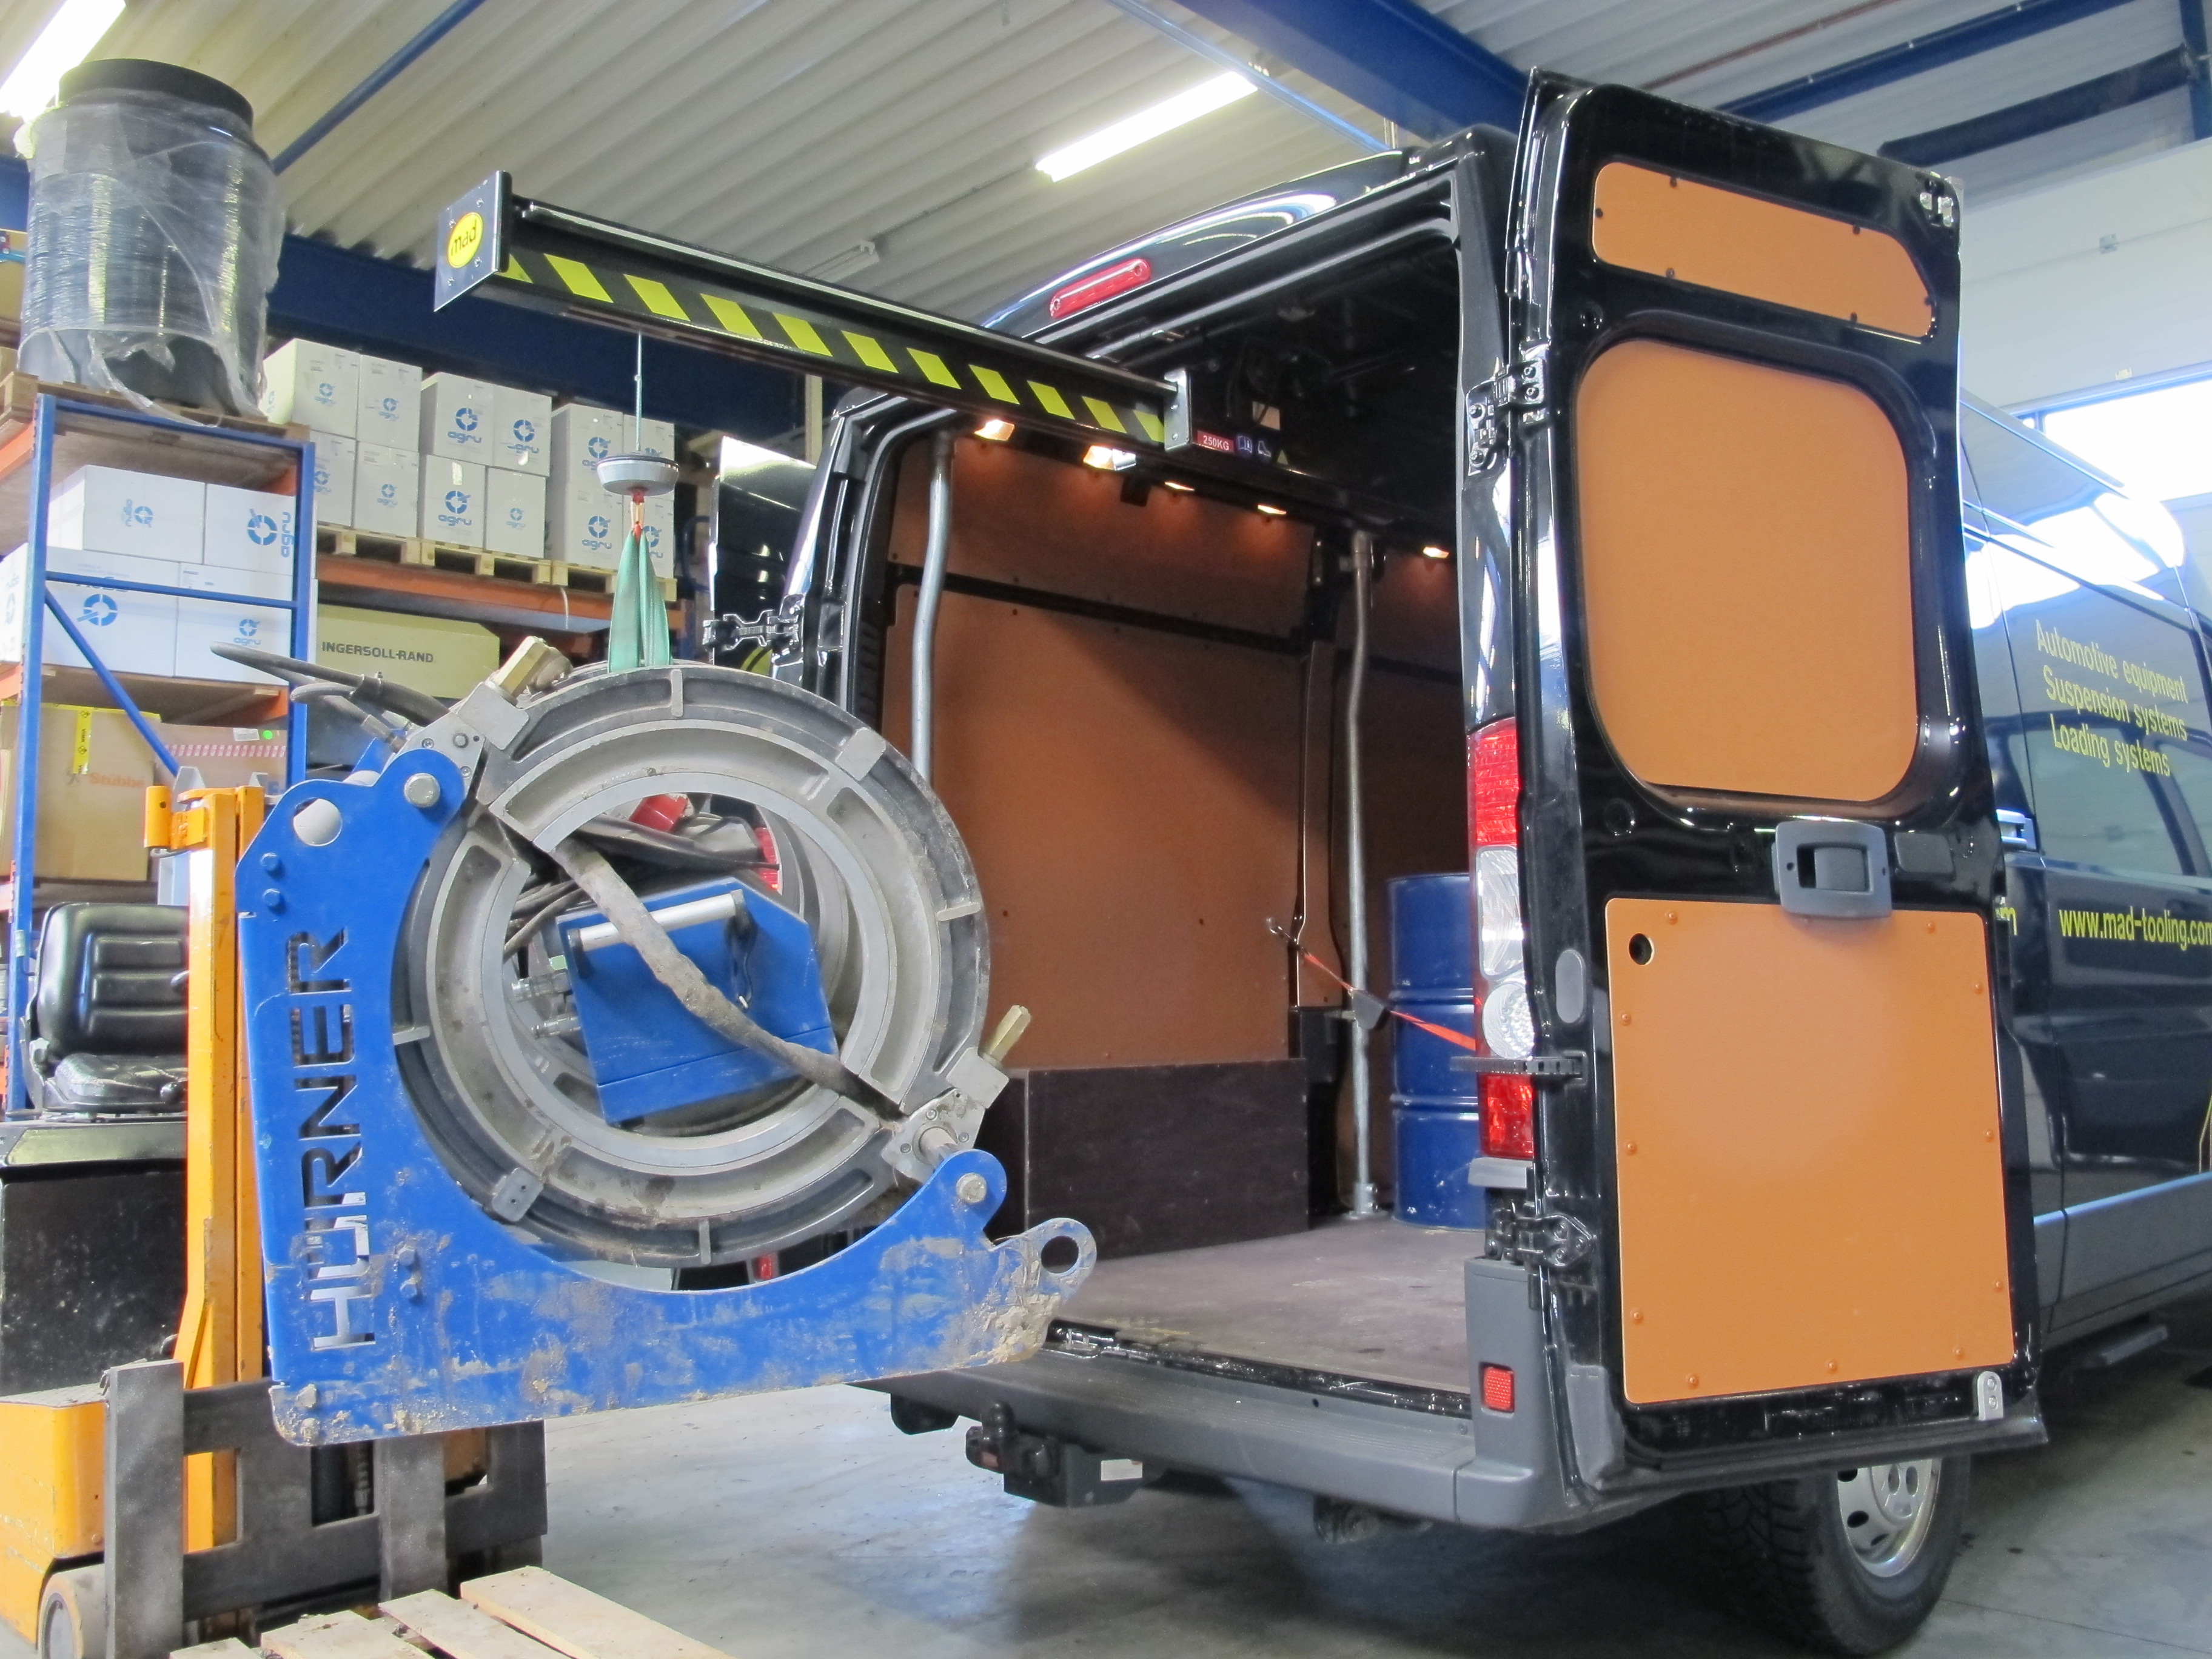 MAD EasyLoad Crane for Lifting, handling and loading industrial equipment into van